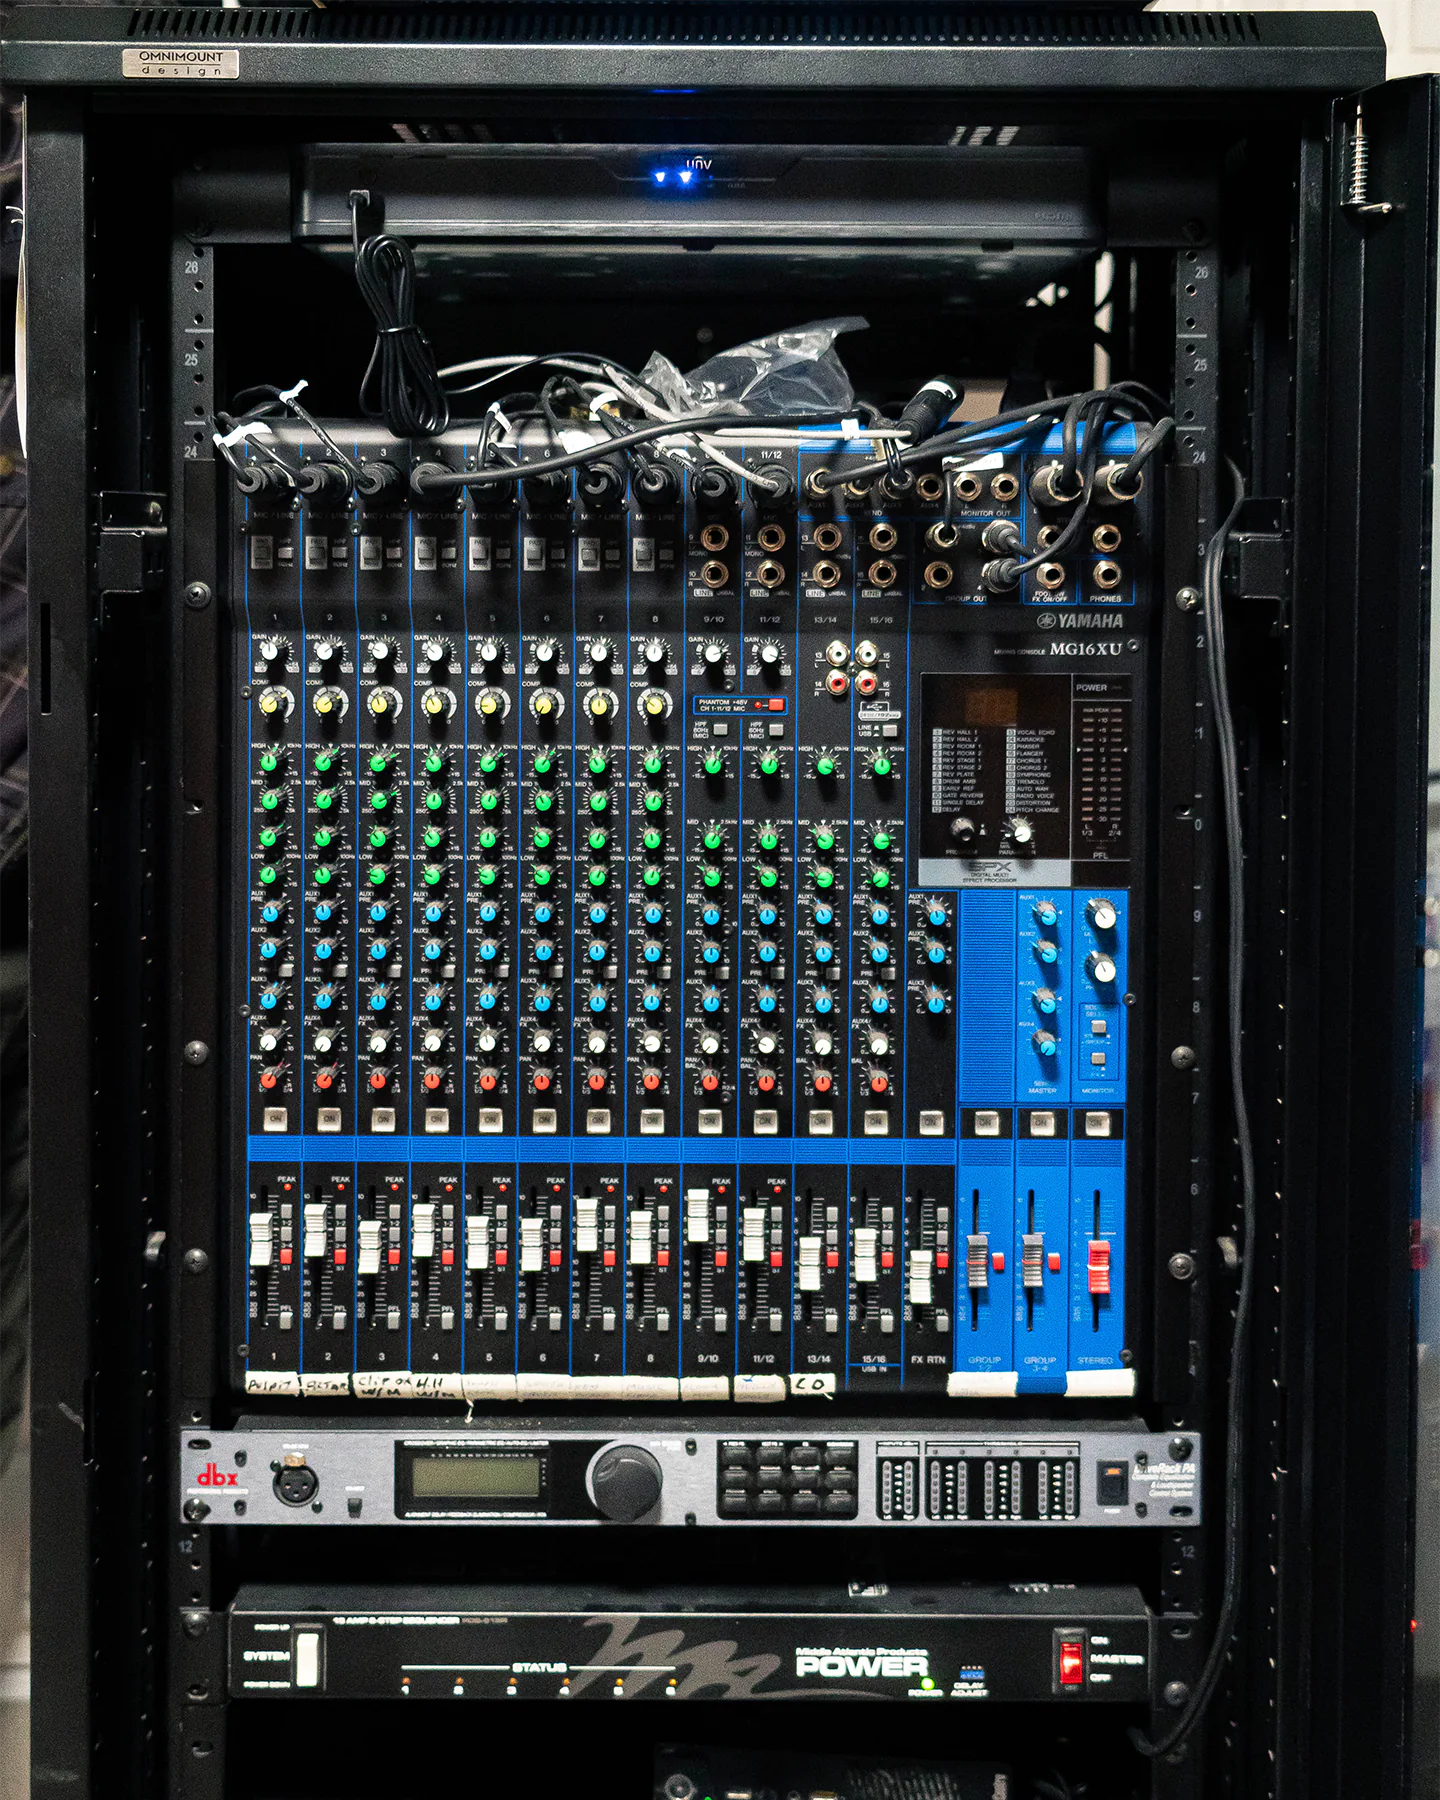 Server rack with audio equipment and security camera system